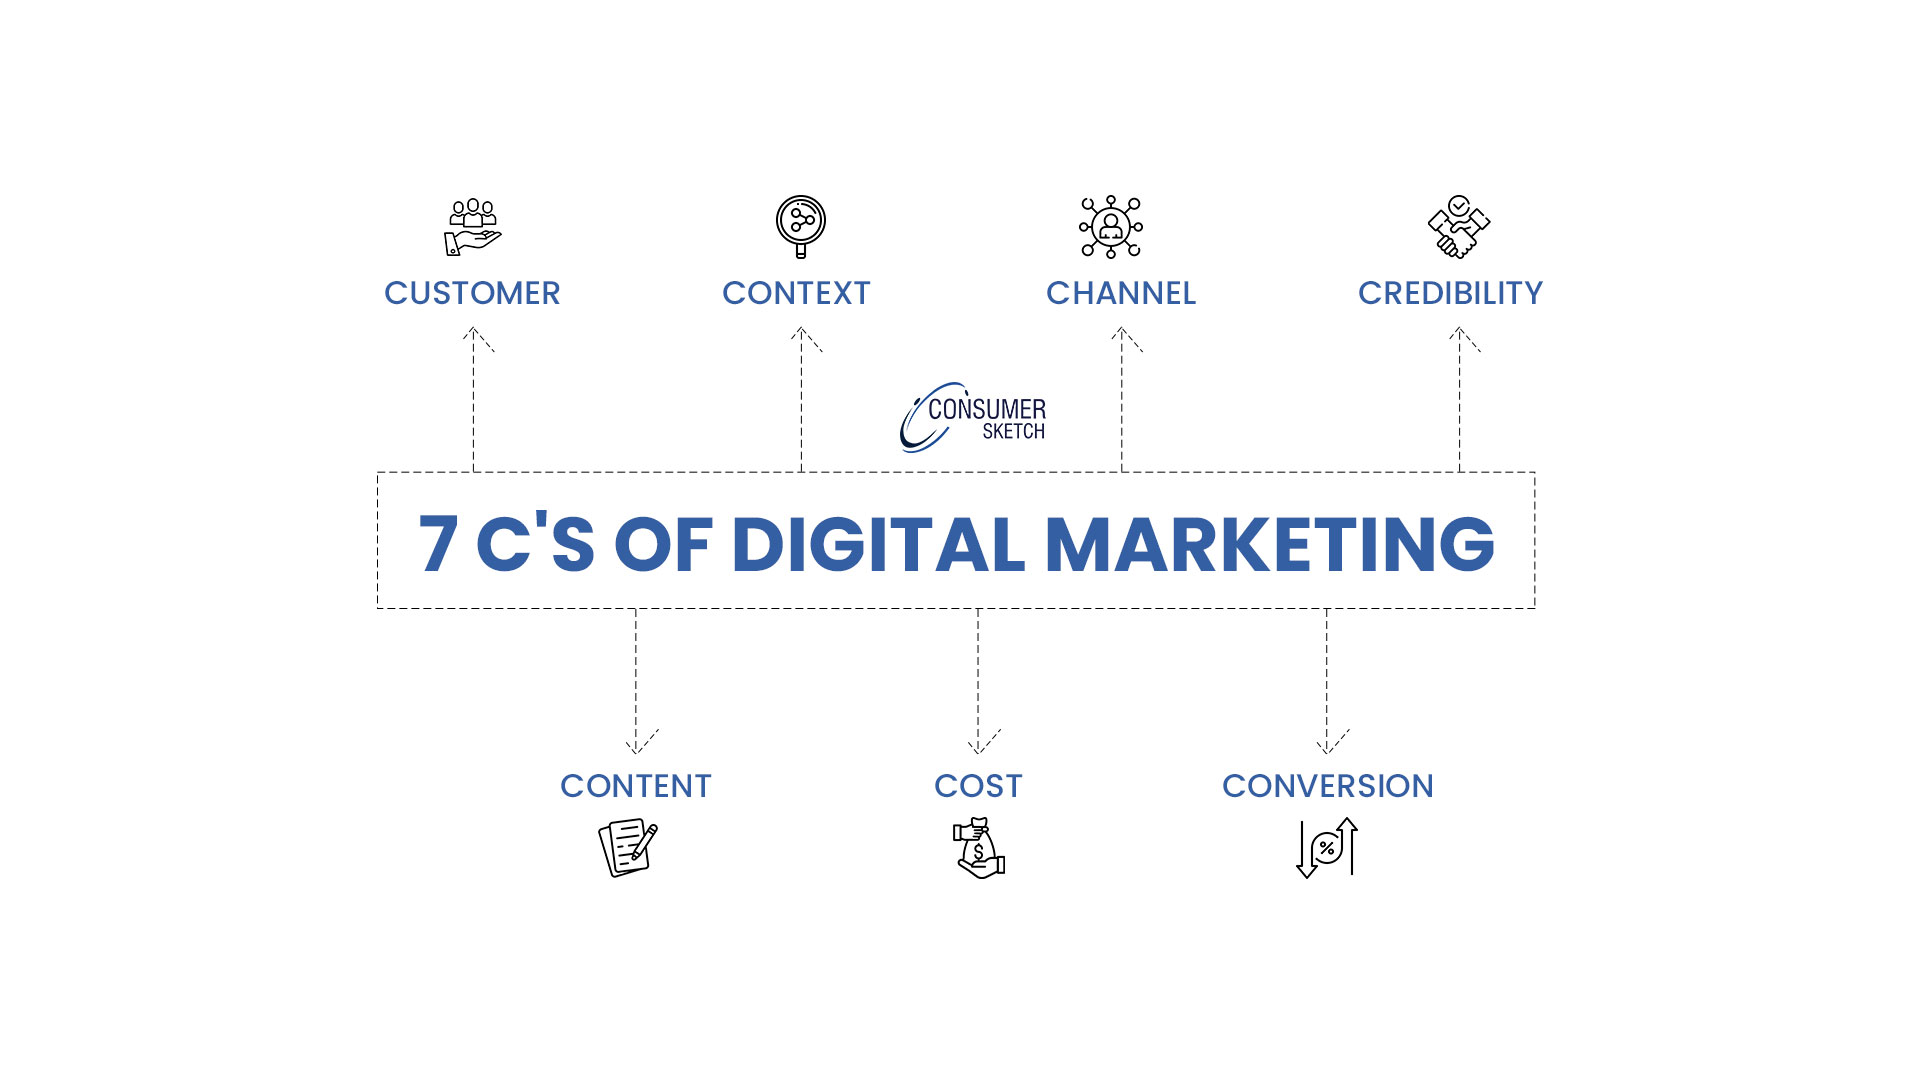 Know the 7 C's of Digital Marketing